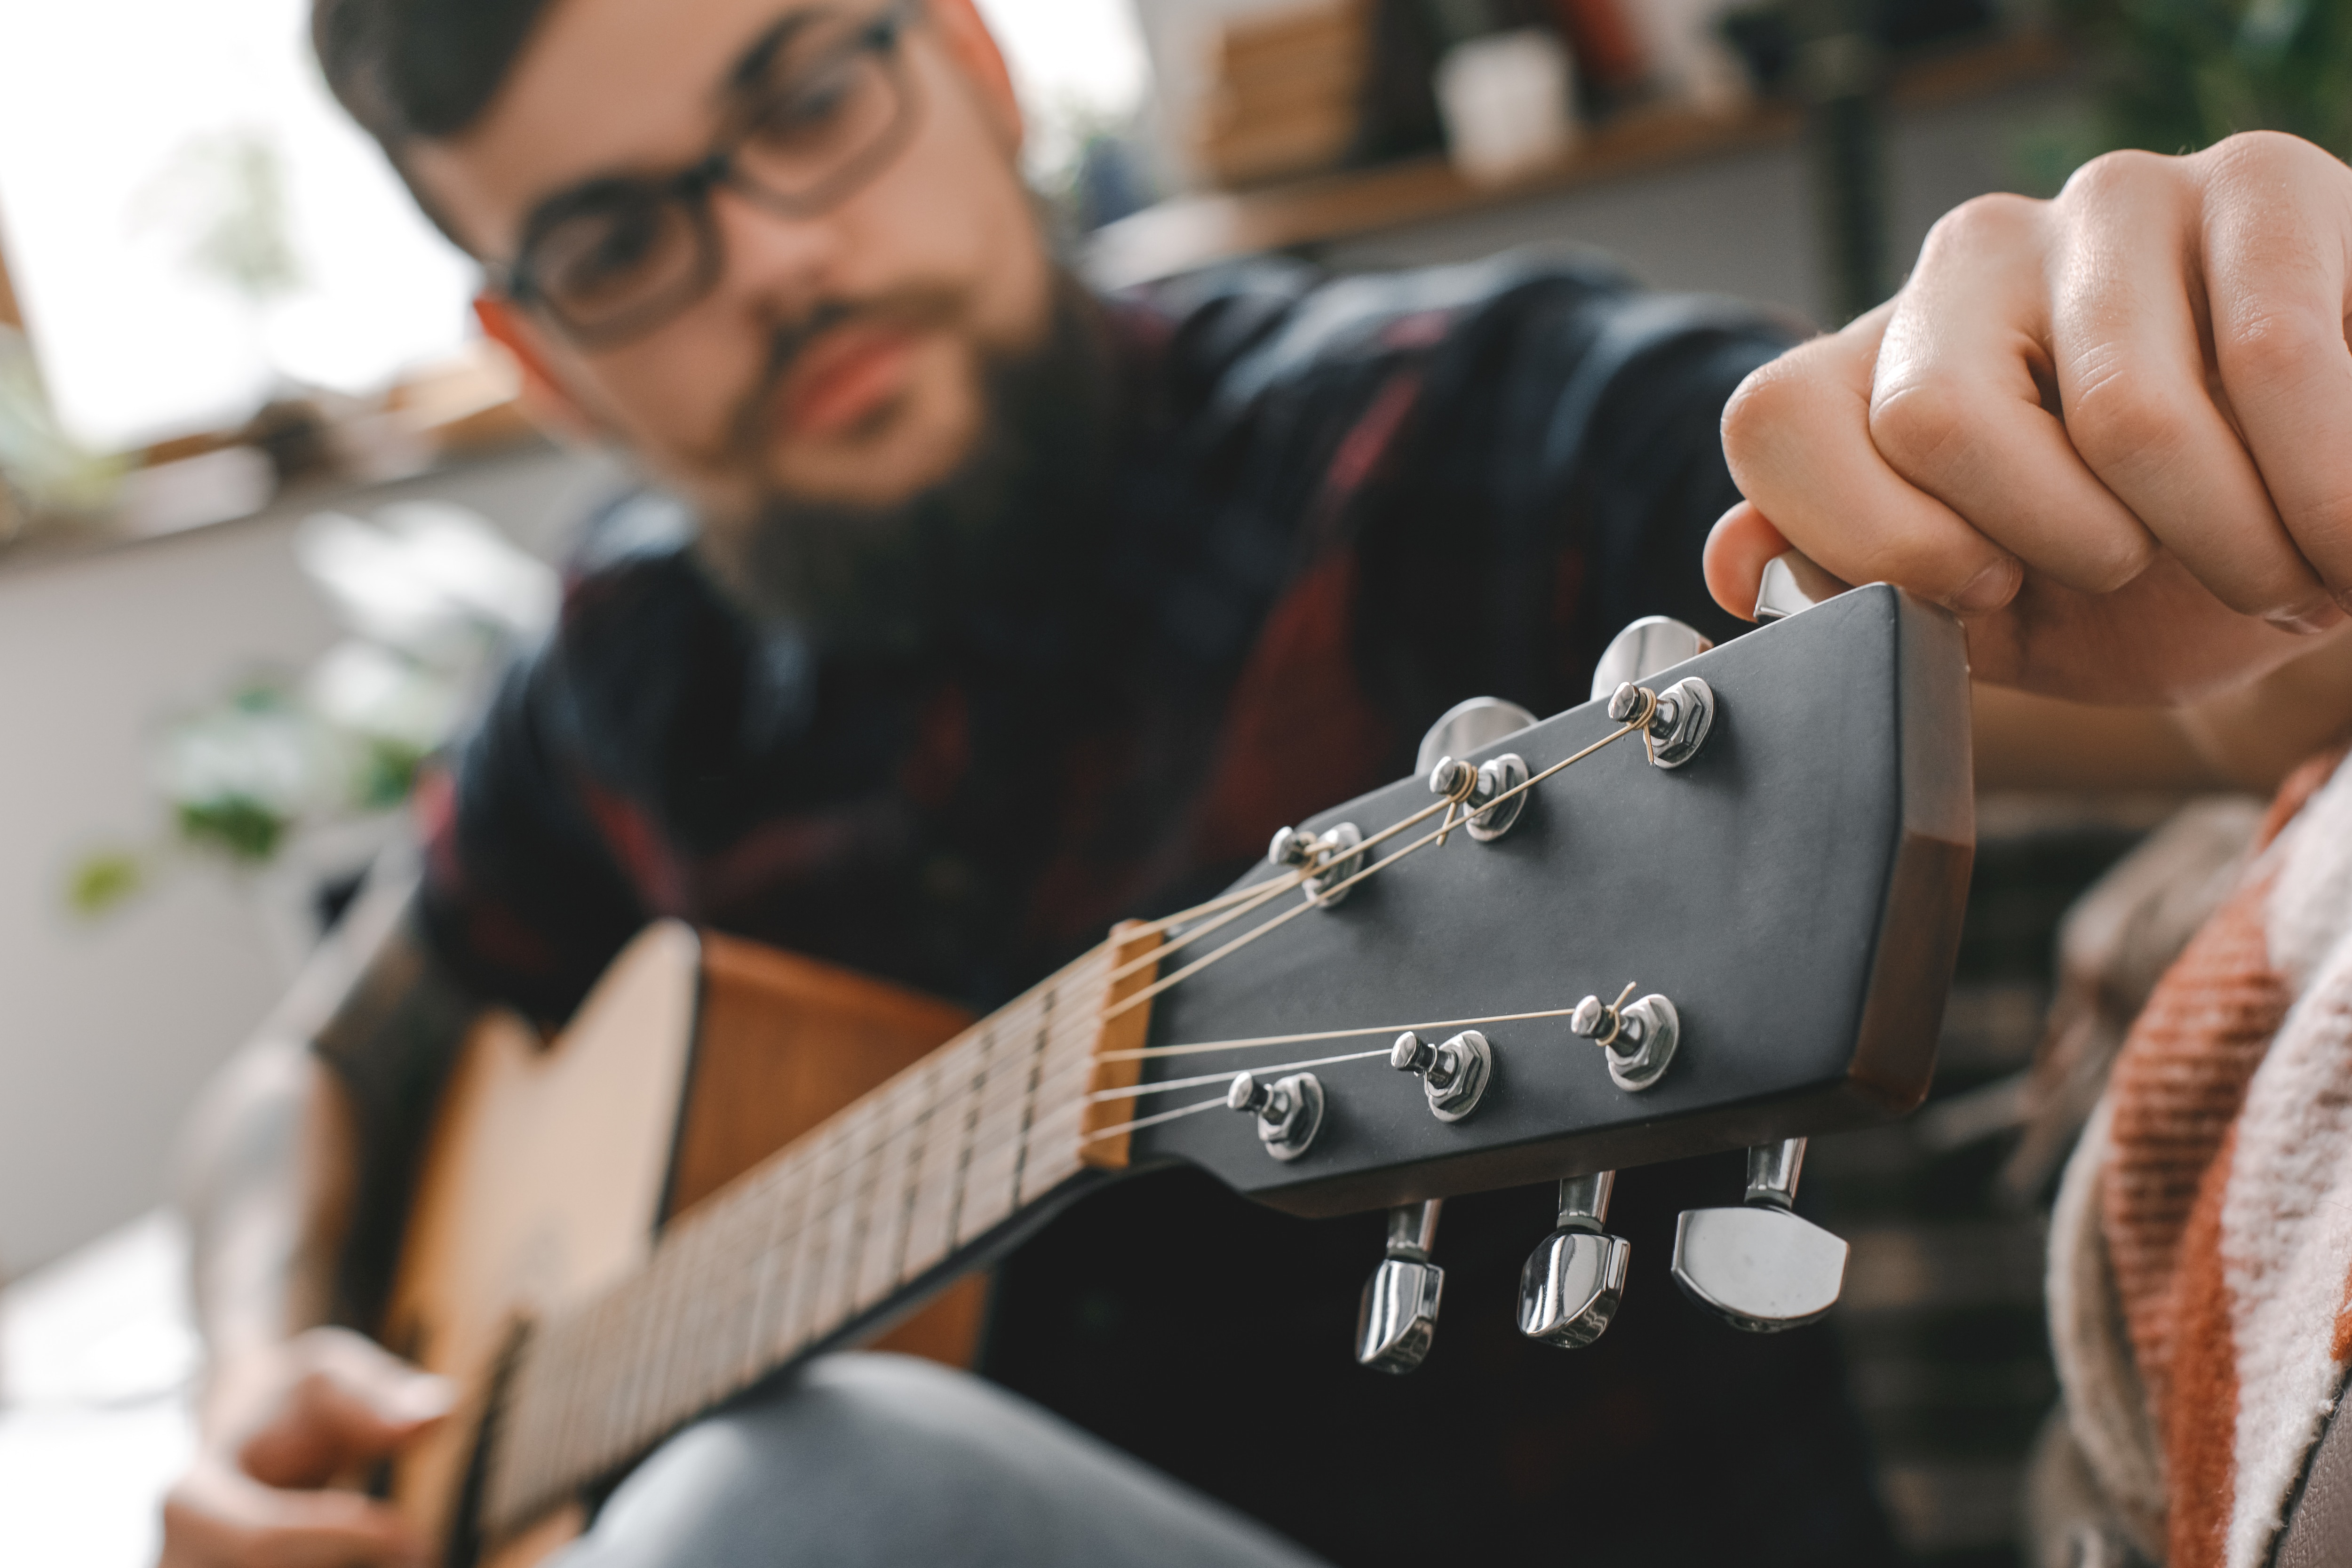 [RS+] Open G Tuning: How To Tune Your Guitar to Open G SEO ARTICLE - How To Tune Your Guitar to Open G (Without a Tuner On-Hand)